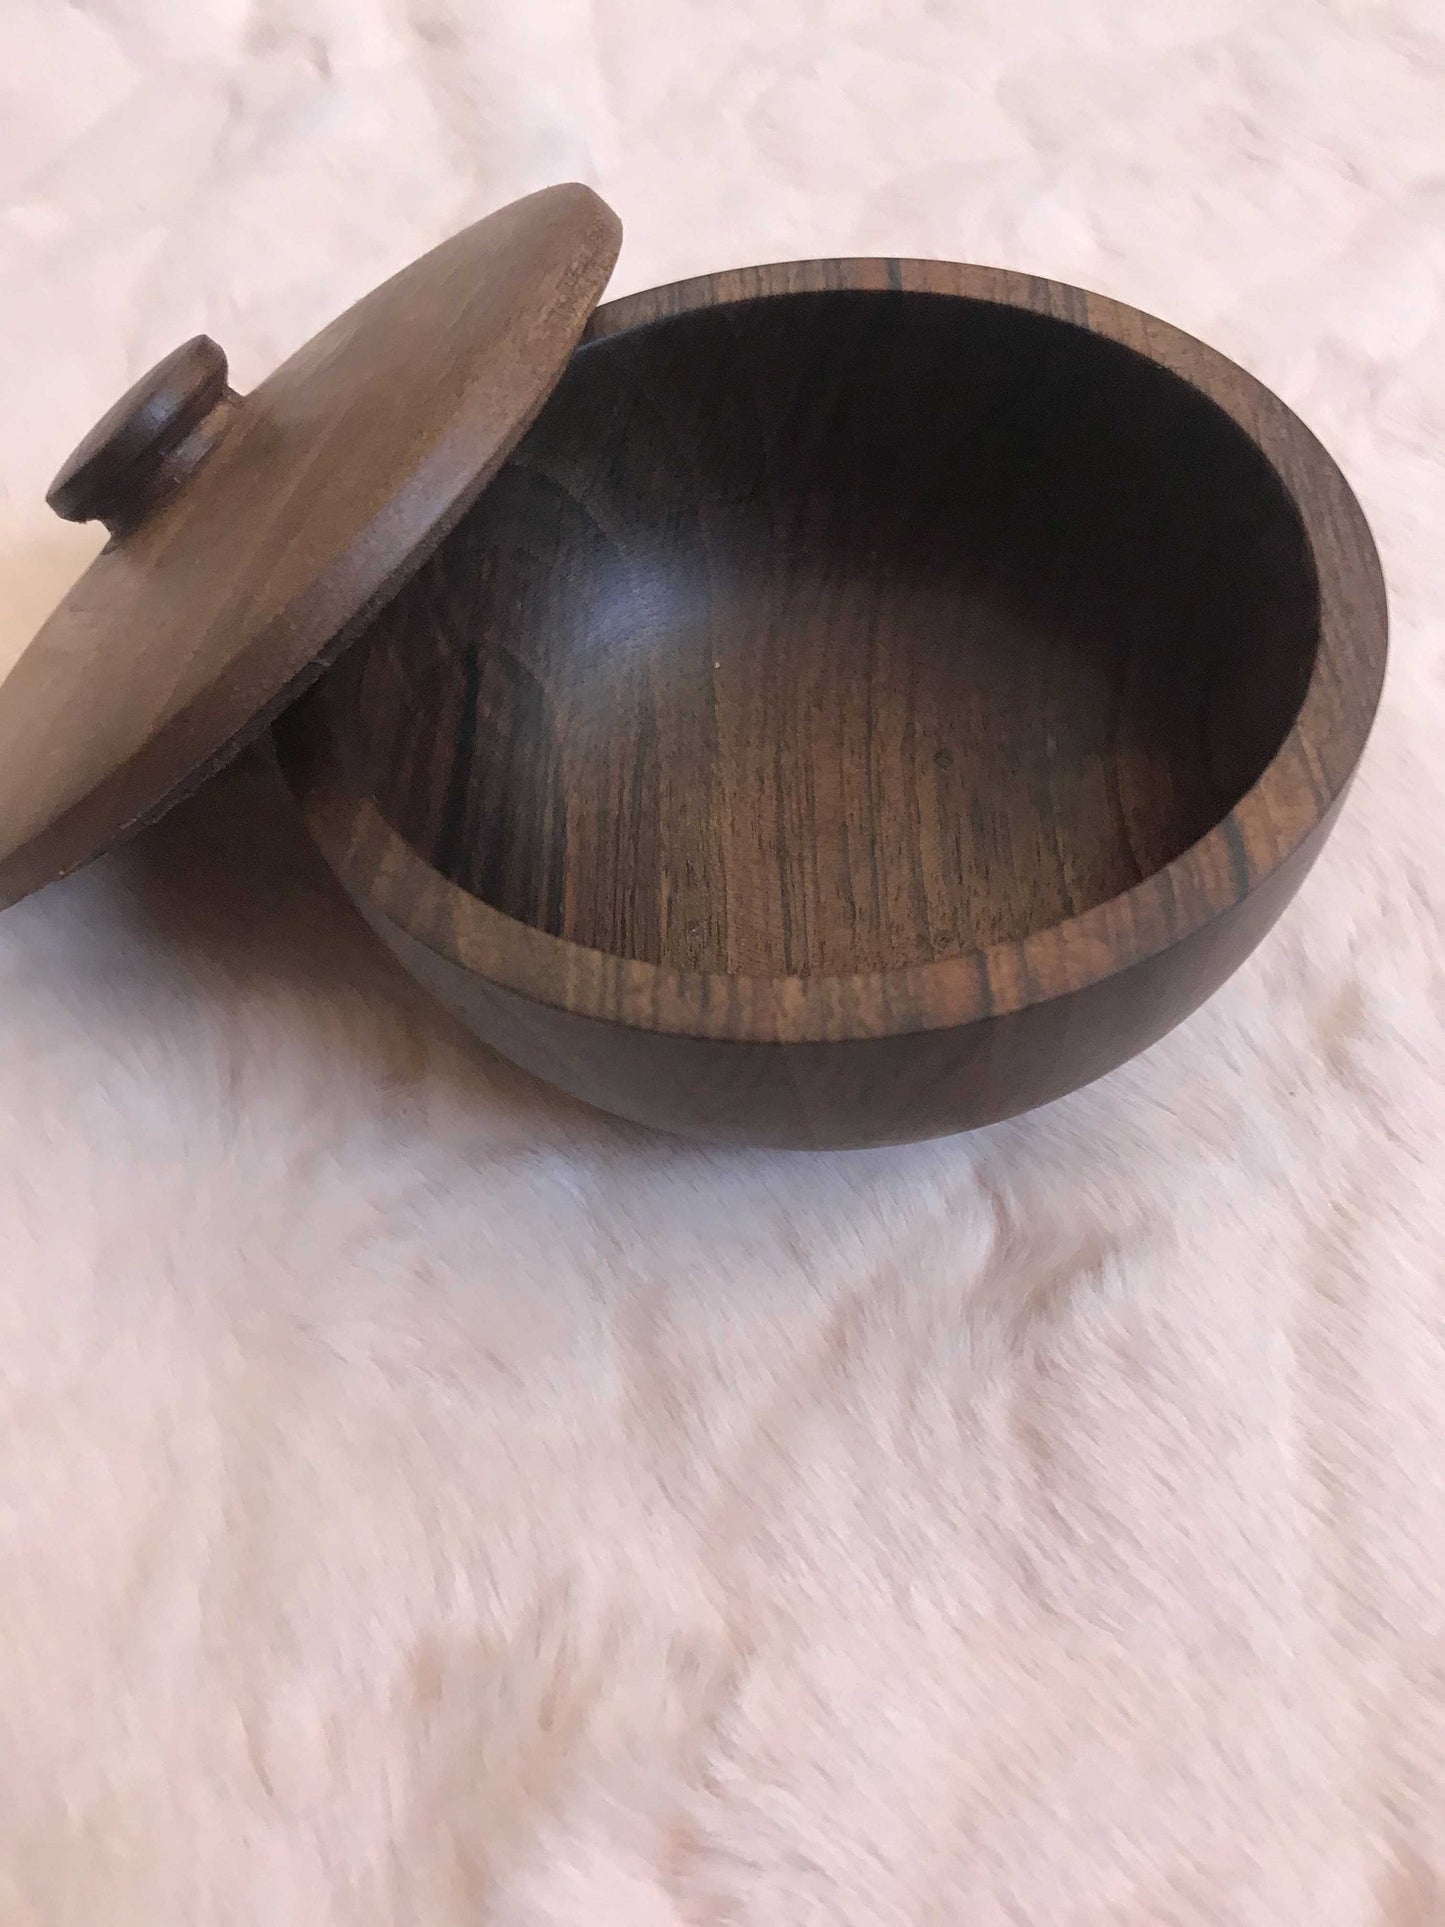 Walnut wood saucer with lid,Serving walnut Tray dry fruit,wooden walnut design,perfect for dry fruits,honey,oil,jam,wooden walnut design